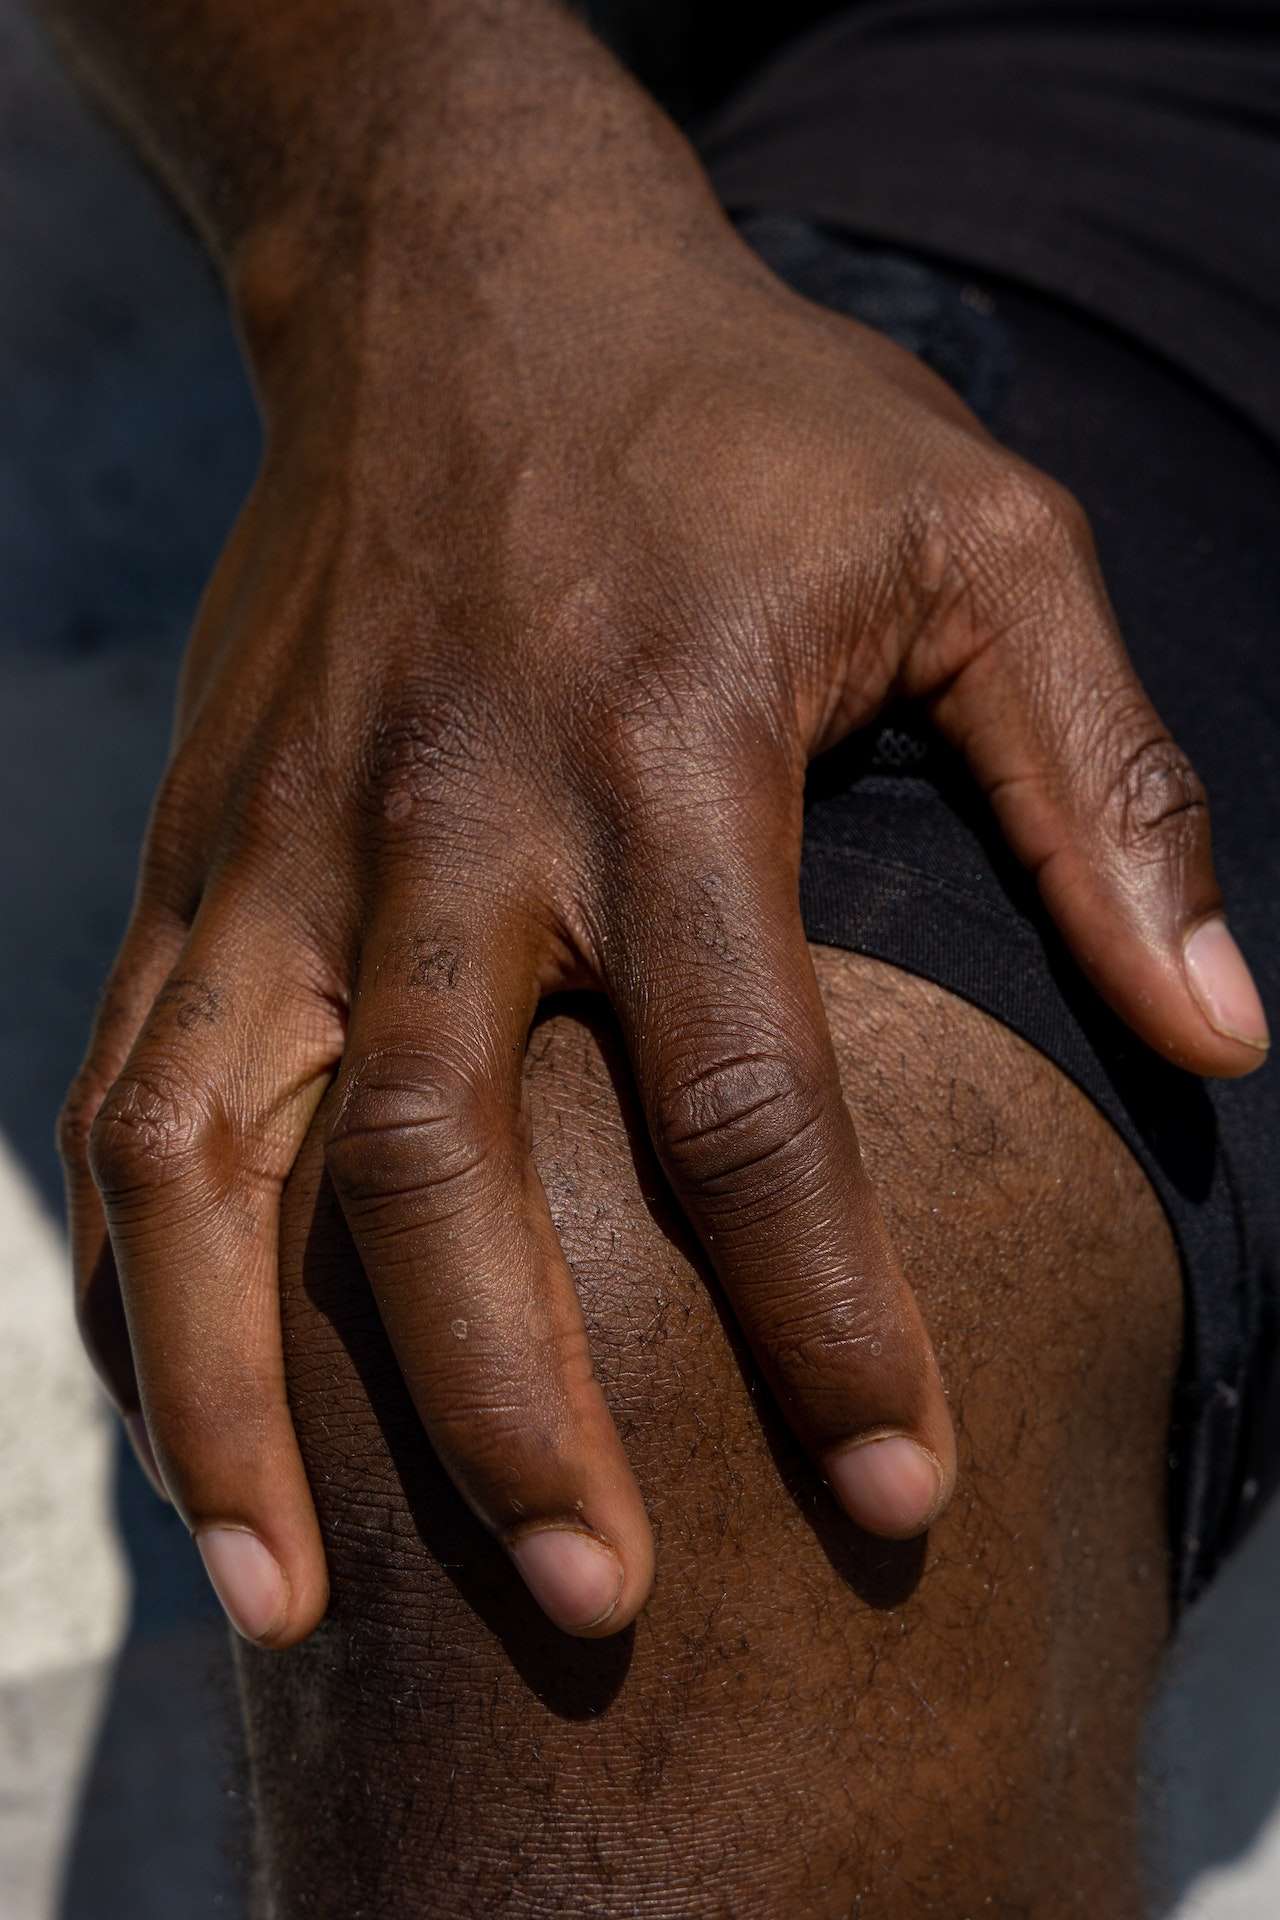 A Person's Hand on His Knee
